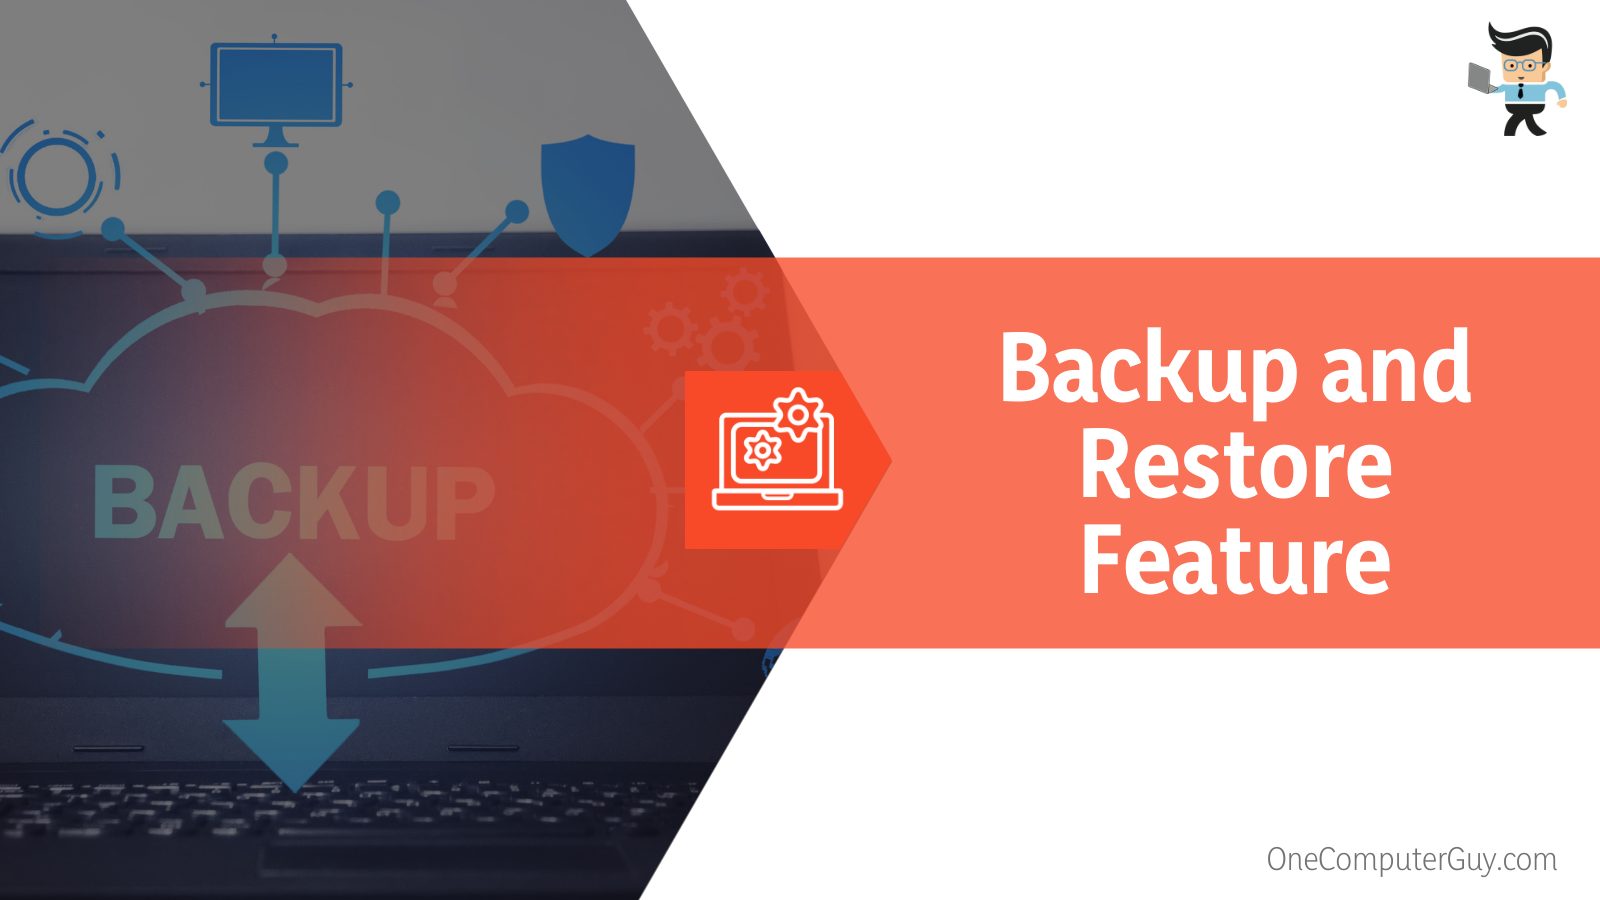 Backup and Restore Feature